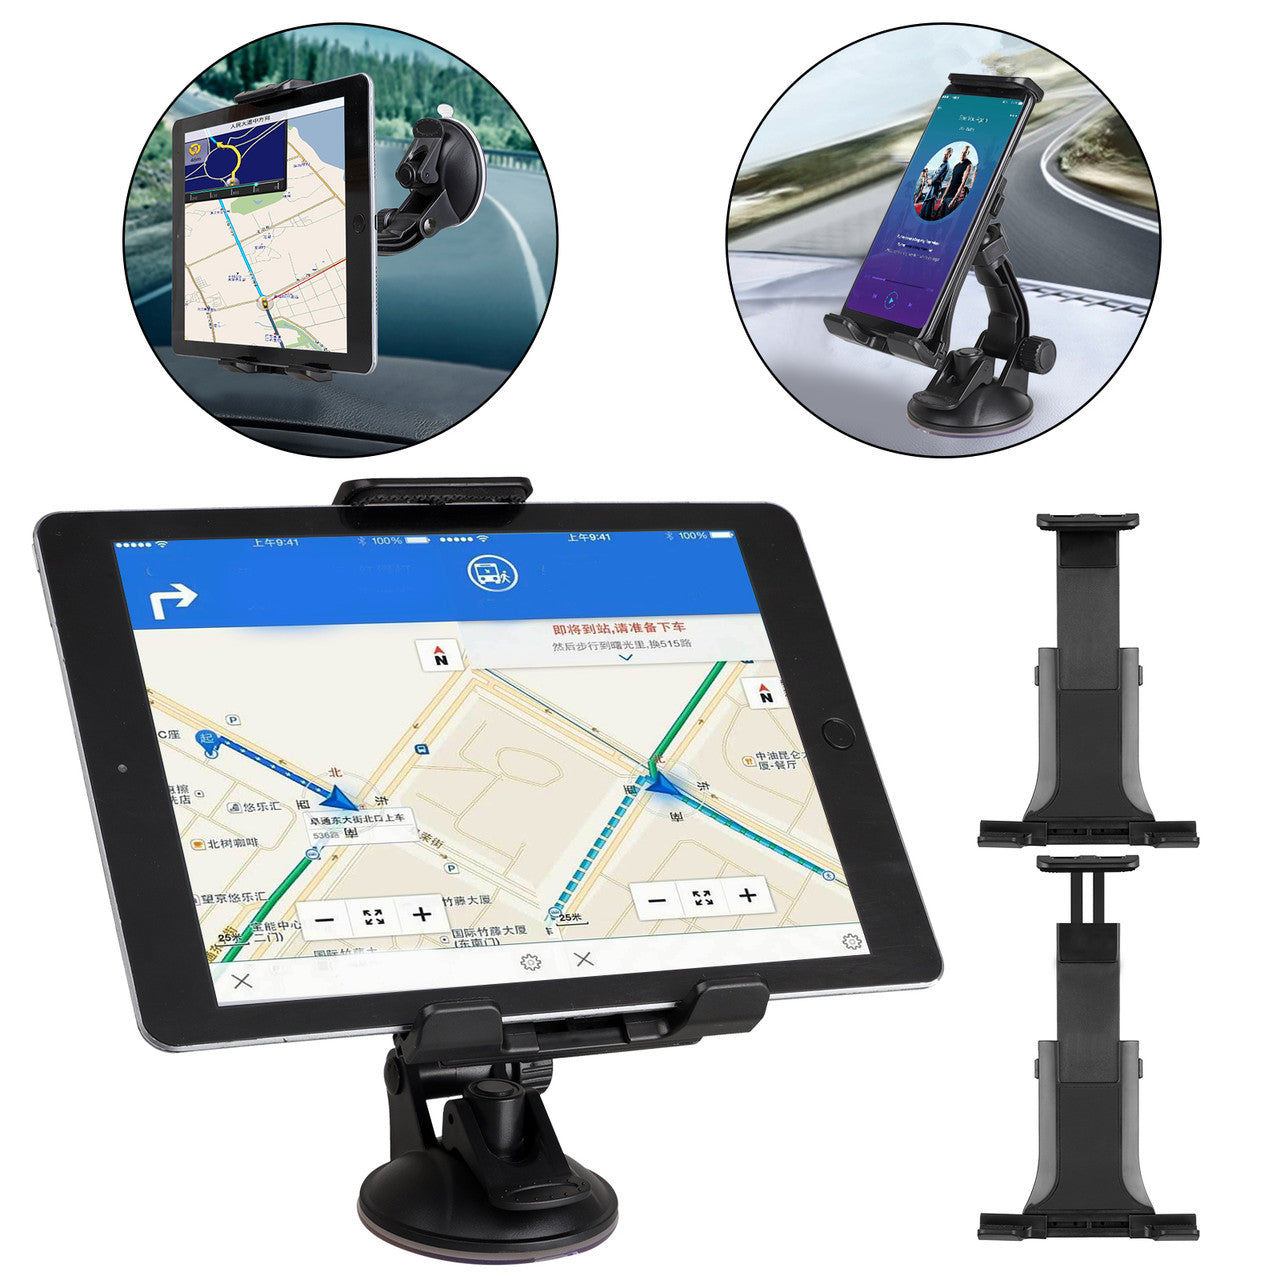 Car Tablet Holder, Tablet Dash Mount Holder for Car Windshield Dashboard - Universal Tablet Phone Car Mount w/ Suction Cup Compatible with iPad Mini Air 4 3/ Samsung Galaxy Tab & All 4-12" Tablets